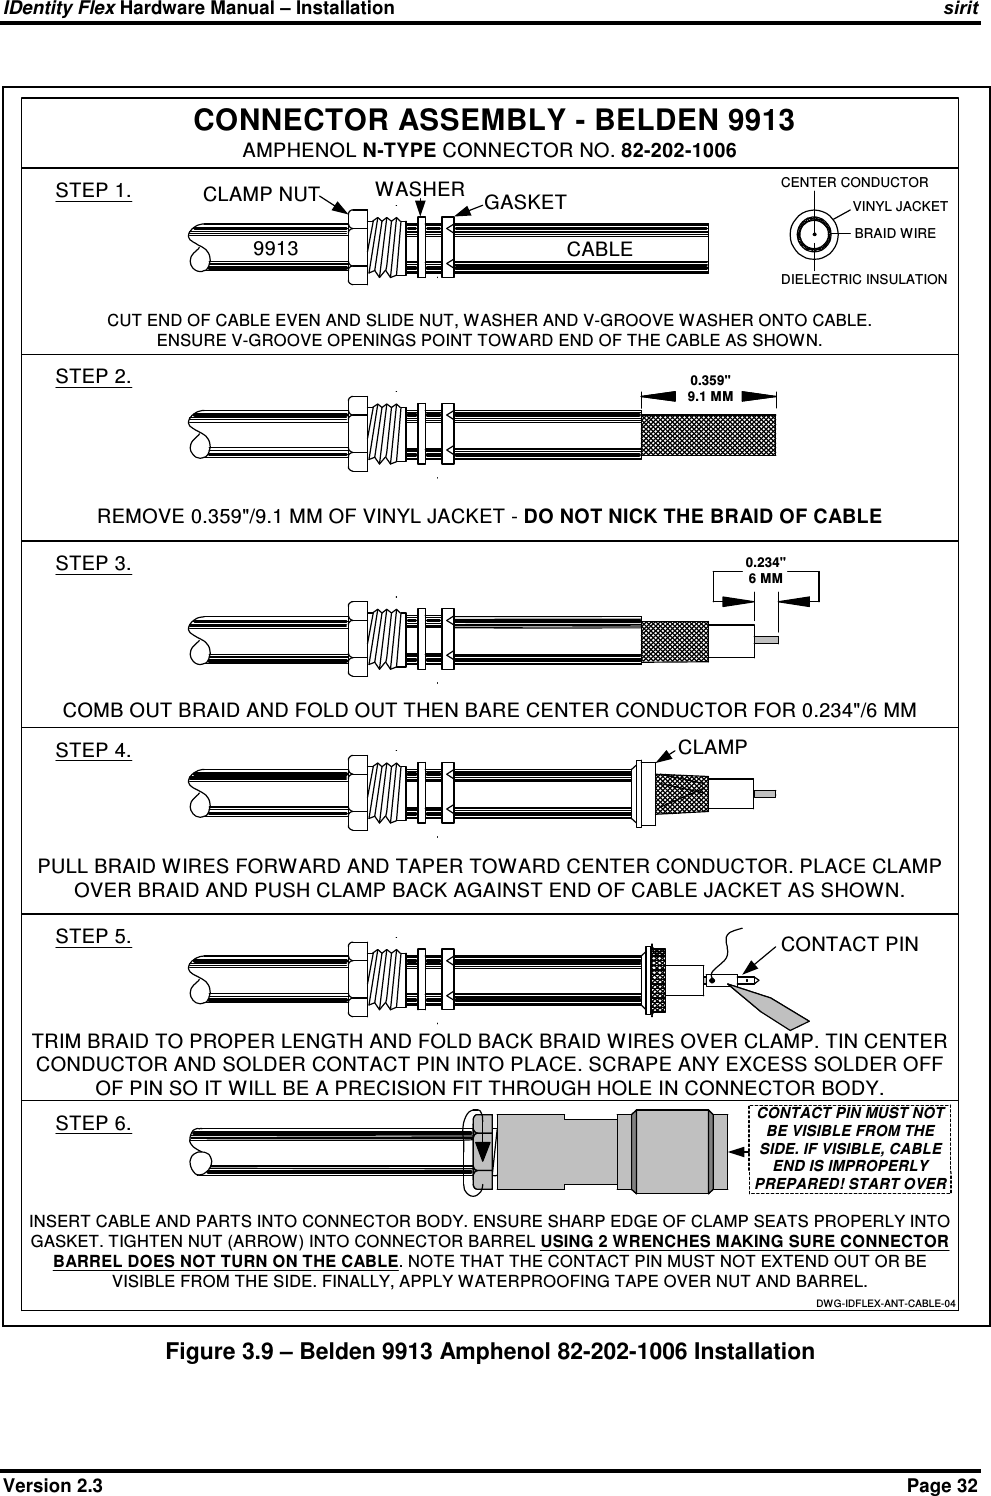 IDentity Flex Hardware Manual – Installation   sirit Version 2.3    Page 32 Figure 3.9 – Belden 9913 Amphenol 82-202-1006 Installation  CONNECTOR ASSEMBLY - BELDEN 9913STEP 1.9913 CABLECUT END OF CABLE EVEN AND SLIDE NUT, WASHER AND V-GROOVE WASHER ONTO CABLE.ENSURE V-GROOVE OPENINGS POINT TOWARD END OF THE CABLE AS SHOWN.STEP 2.AMPHENOL N-TYPE CONNECTOR NO. 82-202-1006REMOVE 0.359&quot;/9.1 MM OF VINYL JACKET - DO NOT NICK THE BRAID OF CABLESTEP 3.STEP 4.STEP 5.STEP 6.0.359&quot;9.1 MMCOMB OUT BRAID AND FOLD OUT THEN BARE CENTER CONDUCTOR FOR 0.234&quot;/6 MM0.234&quot;6 MMINSERT CABLE AND PARTS INTO CONNECTOR BODY. ENSURE SHARP EDGE OF CLAMP SEATS PROPERLY INTOGASKET. TIGHTEN NUT (ARROW ) INTO CONNECTOR BARREL USING 2 WRENCHES MAKING SURE CONNECTORBARREL DOES NOT TURN ON THE CABLE. NOTE THAT THE CONTACT PIN MUST NOT EXTEND OUT OR BEVISIBLE FROM THE SIDE. FINALLY, APPLY WATERPROOFING TAPE OVER NUT AND BARREL.VINYL JACKETBRAID WIREDIELECTRIC INSULATIONCENTER CONDUCTORDWG-IDFLEX-ANT-CABLE-04PULL BRAID WIRES FORWARD AND TAPER TOWARD CENTER CONDUCTOR. PLACE CLAMPOVER BRAID AND PUSH CLAMP BACK AGAINST END OF CABLE JACKET AS SHOWN.CLAMP NUT WASHER GASKETCLAMPCONTACT PINTRIM BRAID TO PROPER LENGTH AND FOLD BACK BRAID WIRES OVER CLAMP. TIN CENTERCONDUCTOR AND SOLDER CONTACT PIN INTO PLACE. SCRAPE ANY EXCESS SOLDER OFFOF PIN SO IT WILL BE A PRECISION FIT THROUGH HOLE IN CONNECTOR BODY.CONTACT PIN MUST NOTBE VISIBLE FROM THESIDE. IF VISIBLE, CABLEEND IS IMPROPERLYPREPARED! START OVER 